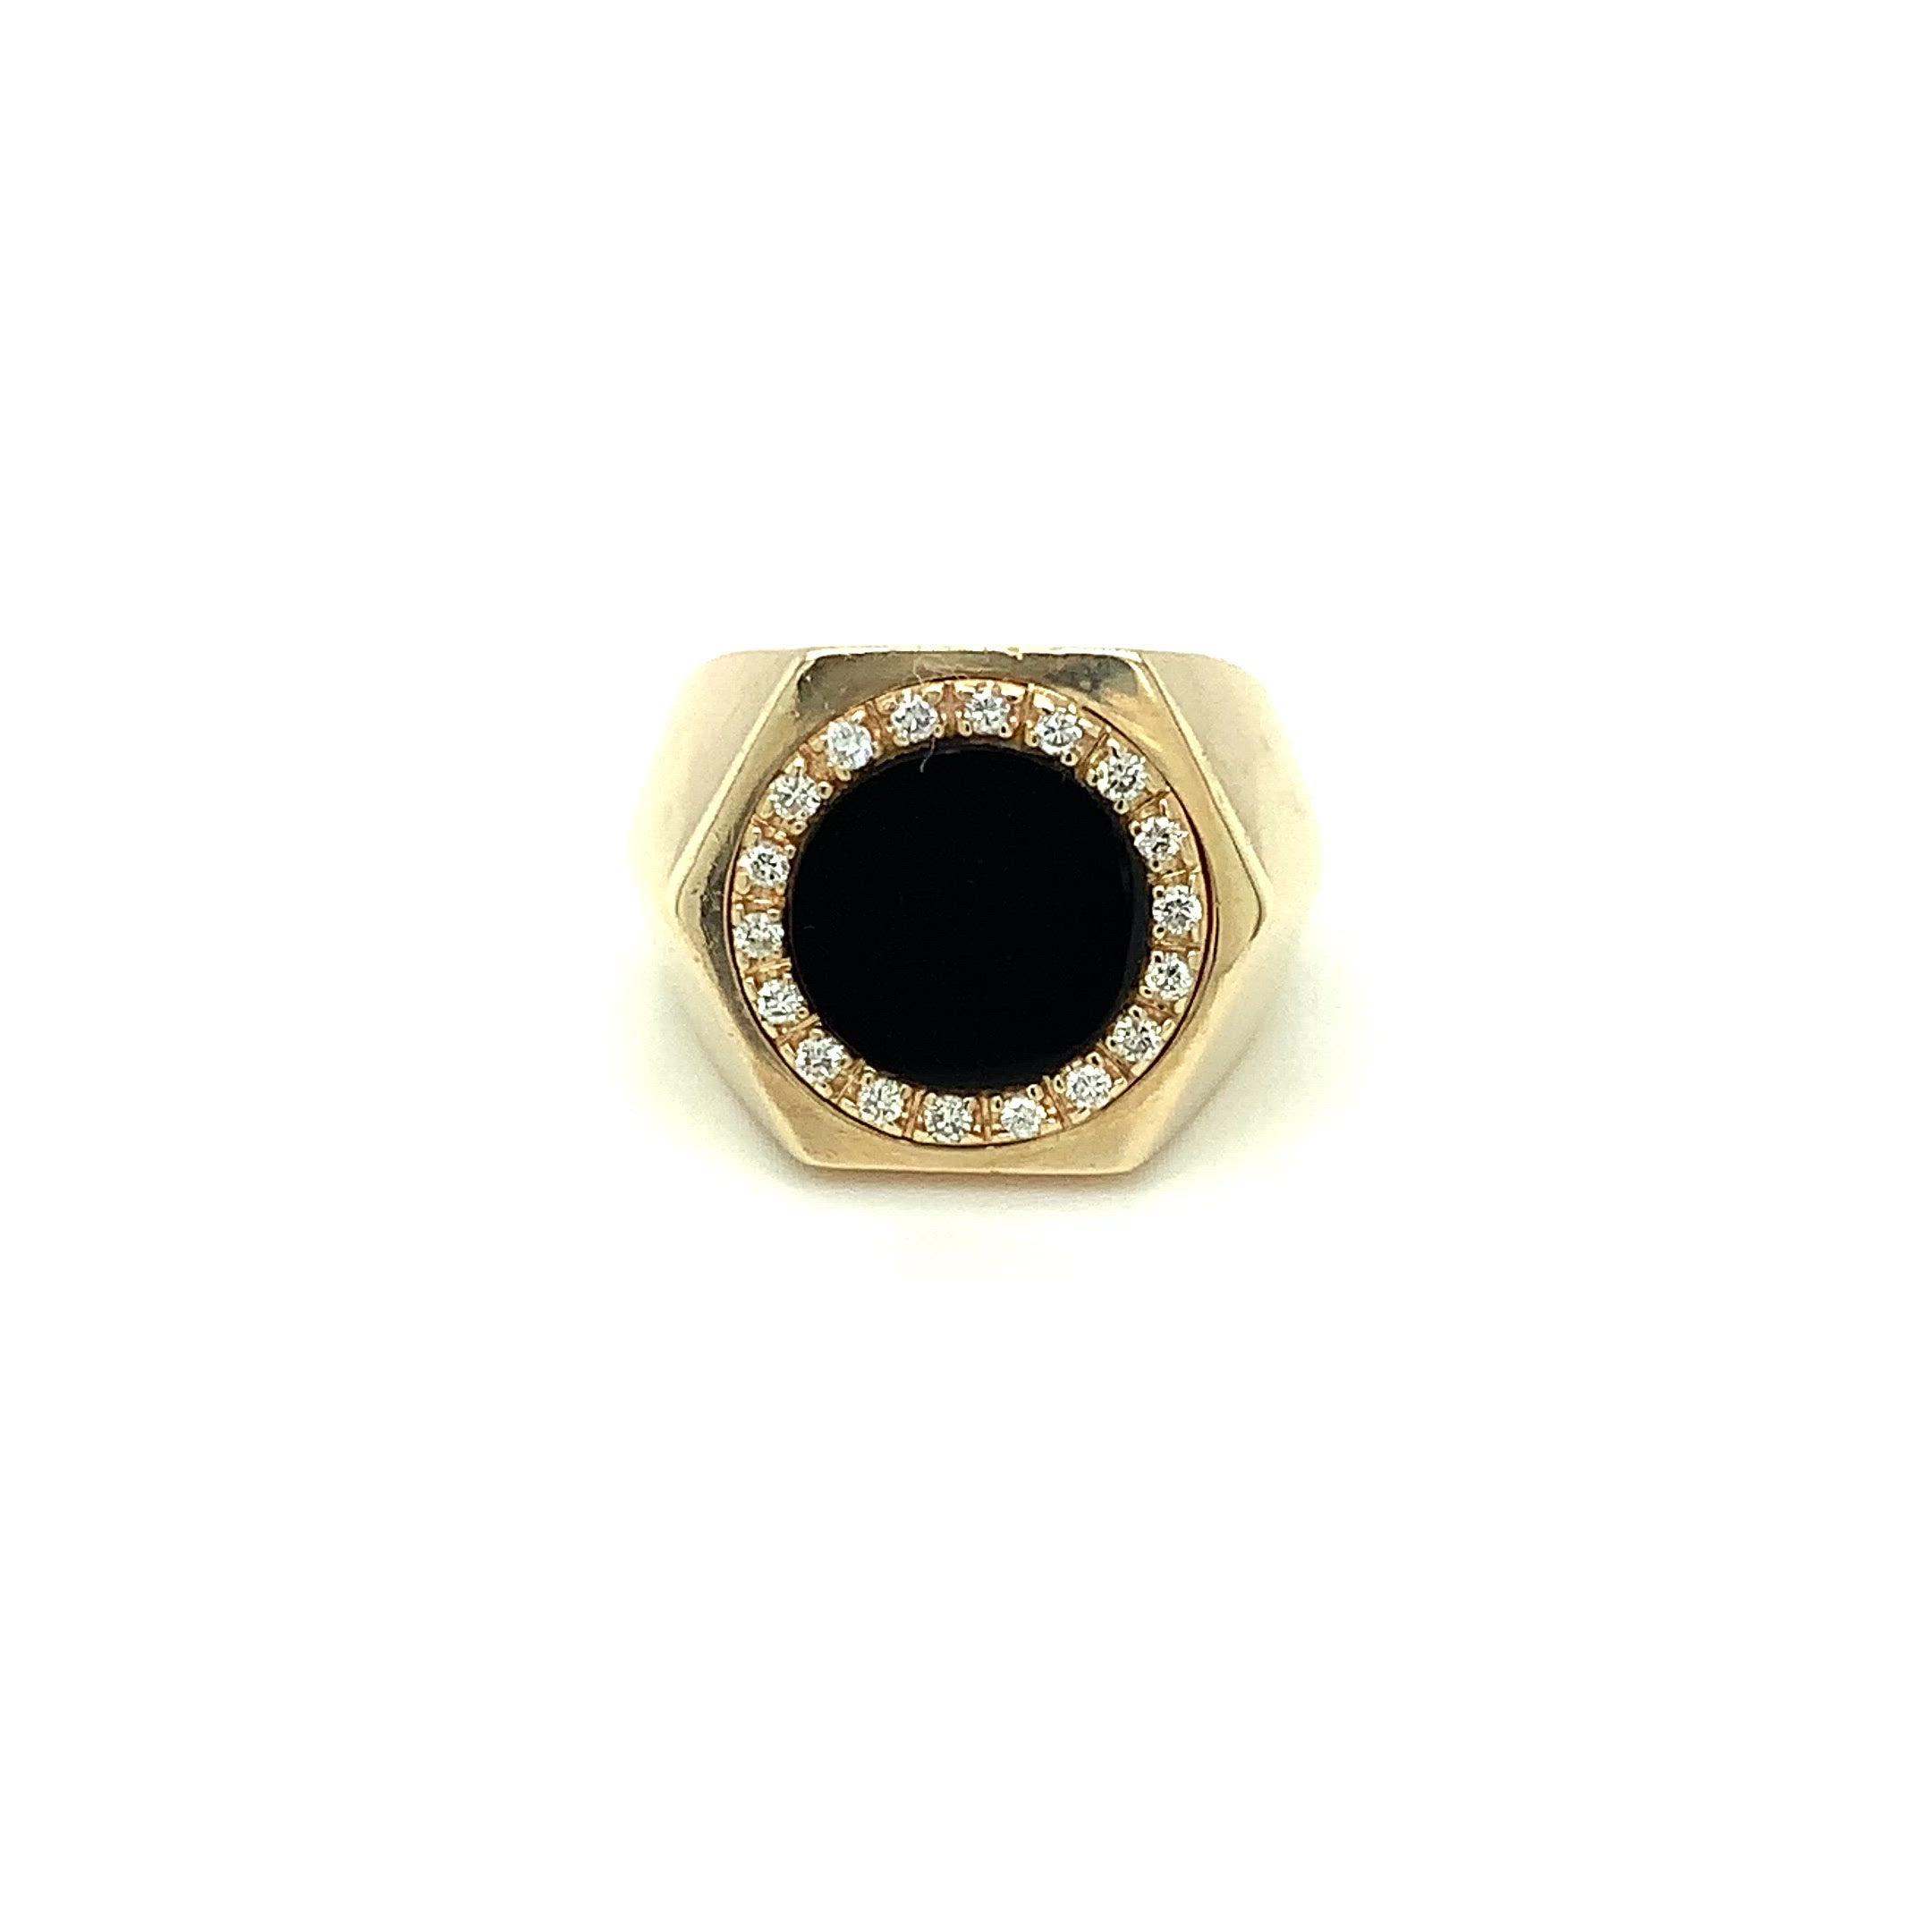 Natural Onyx & Diamond Ring 14K Solid Gold .18tcw Men's Ring Onyx Ring Statement Ring Cocktail Ring Vintage Ring Estate Ring Estate Jewelry